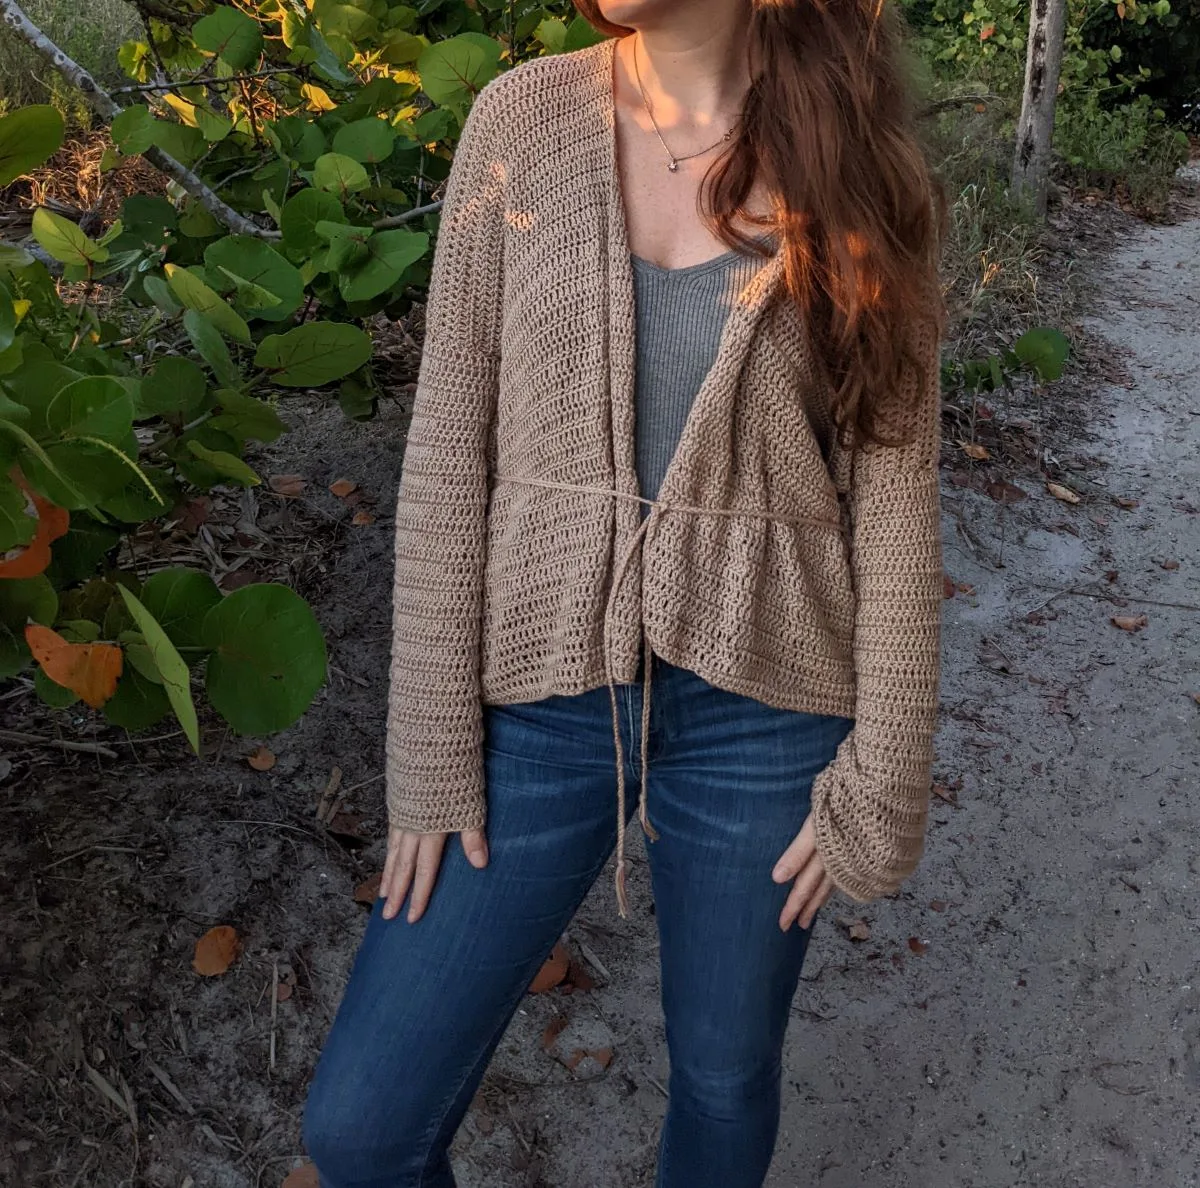 model wearing a lightweight crochet cardigan with a strap around the waist.